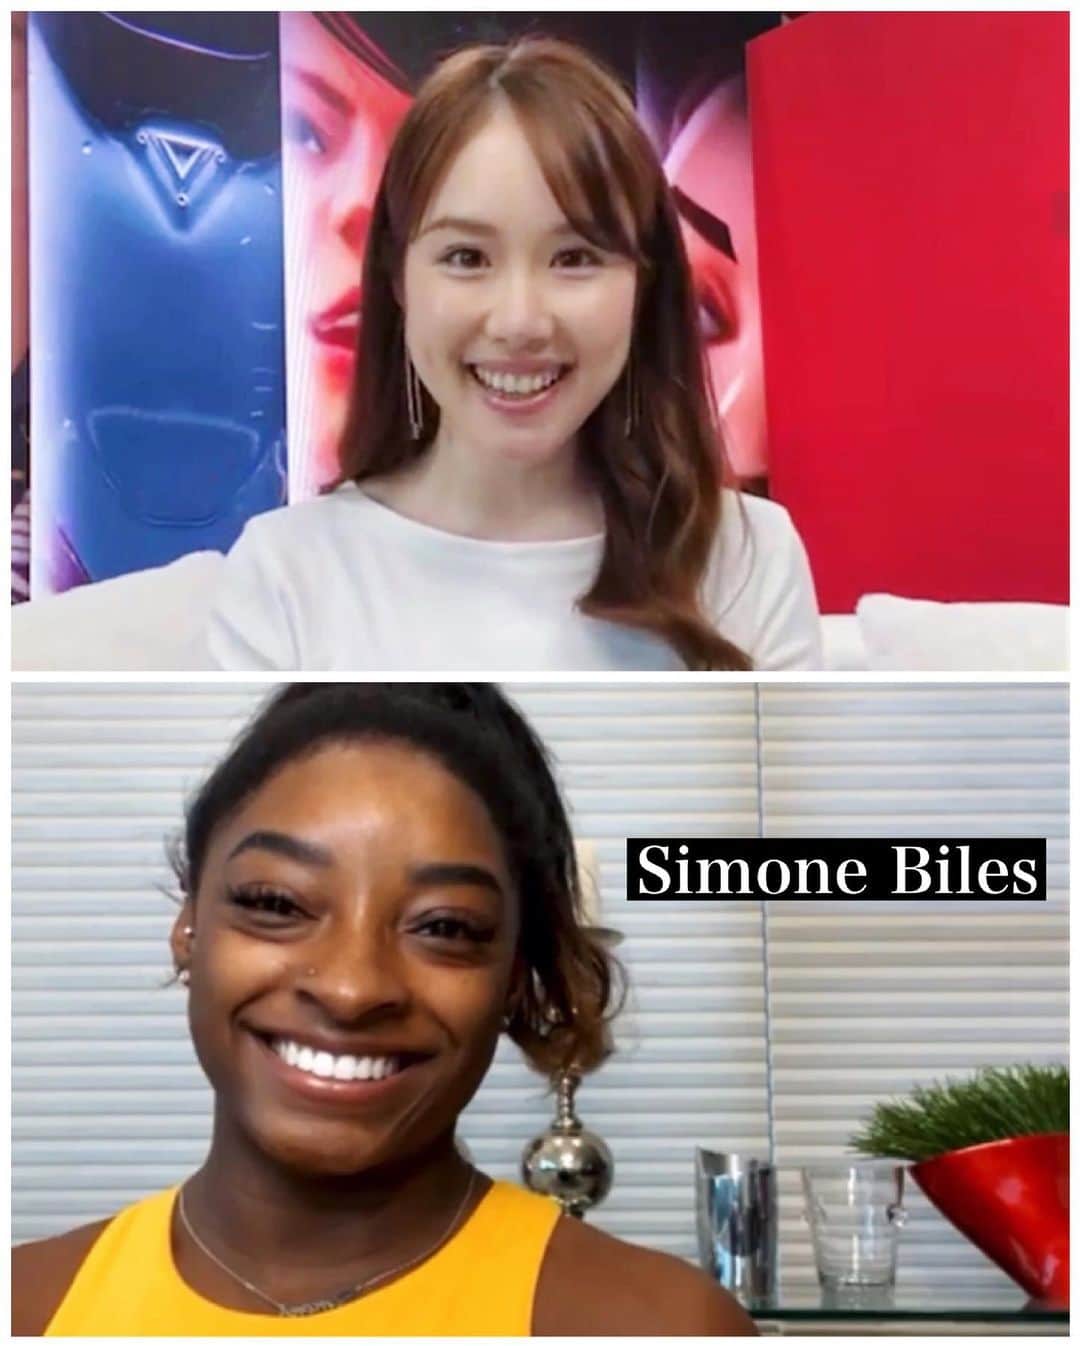 メロディー・モリタのインスタグラム：「Global Launch of SK-II STUDIO's VS Series! Directed the premiere & had a 1-on-1 live interview with Simone Biles!❤️✨  We kicked off the day with an hour-long JP premiere to reveal the animated anthology series that tells the life experiences of 6 top athletes facing social pressures that are impacting women today. Naomi Watanabe and kemio were the special hosts, and their personalities shined throughout the livestream! We were in the studio from 4am, but the excitement and great teamwork produced a wonderful outcome☺️  Right after the one-hour livestream, I had the opportunity to chat live with Simone discussing everything about her first ever animated film, "VS Trolls." In addition to answering questions sent in from her fans, I asked her several of my own questions and ended up discovering her #CHANGEDESTINY moment she had at just six years old!  As a sneak peek, I shared a snippet in Slide 3, but you can watch our full live conversation uploaded @SKII's IGTV!🎥 The livestream link is also shared on my Stories, so please check it out as well as the rest of the VS Series🙌 You will be blown away!😆  本日、SK-II STUDIOの「VSシリーズ」プレミア試写会がニューヨークで行われ、1時間の生放送のディレクターと、シモーン・バイルス選手との生配信インタビューを行わせて頂きました!!✨  日本時間の夜8時から行われた「VSシリーズプレミア試写会」では、MCの渡辺直美さんとkemioさんがご出演！☺️ NY時間では朝4時入りだったにもかかわらず、お二人の息がぴったり合ったトークのおかげで、SK-IIが2年以上かけて制作した6つの映像作品の素晴らしさをお伝えすることができました✨  プレミア試写会後に行ったシモーン・バイルス選手との生配信インタビューでは、心ない言葉を投げかける「アンチ」との向き合い方＆それを乗り越えてきた方法、自身の体験談を含めながら作品で伝えているメッセージについて語って頂きました。  体操競技で史上最多のメダル獲得者のトップアスリートであるシモーンですが、実は彼女が6歳だった時に、とあるきっかけから「自分の運命を変えた瞬間」に出会ったということを今回のインタビューで知りました💡 これは正にSK-IIブランドの信念である「#CHANGEDESTINY」と深くリンクする、とても素敵なストーリーでした。  投稿では1分のプレビュー動画をシェアしていますが、生配信インタビューのフルバージョンはSK-IIアカウントにアップされていますので、是非チェックしてみてください！🎥 そしてSK-II「VSシリーズ」全作品は、YouTubeでフルバージョンを観ることができますので、それぞれの選手達の素晴らしいメッセージを是非ご覧ください😊🎀 #SKII #VSSeries #SKIIPartner #MelodeeMoritainterviews」